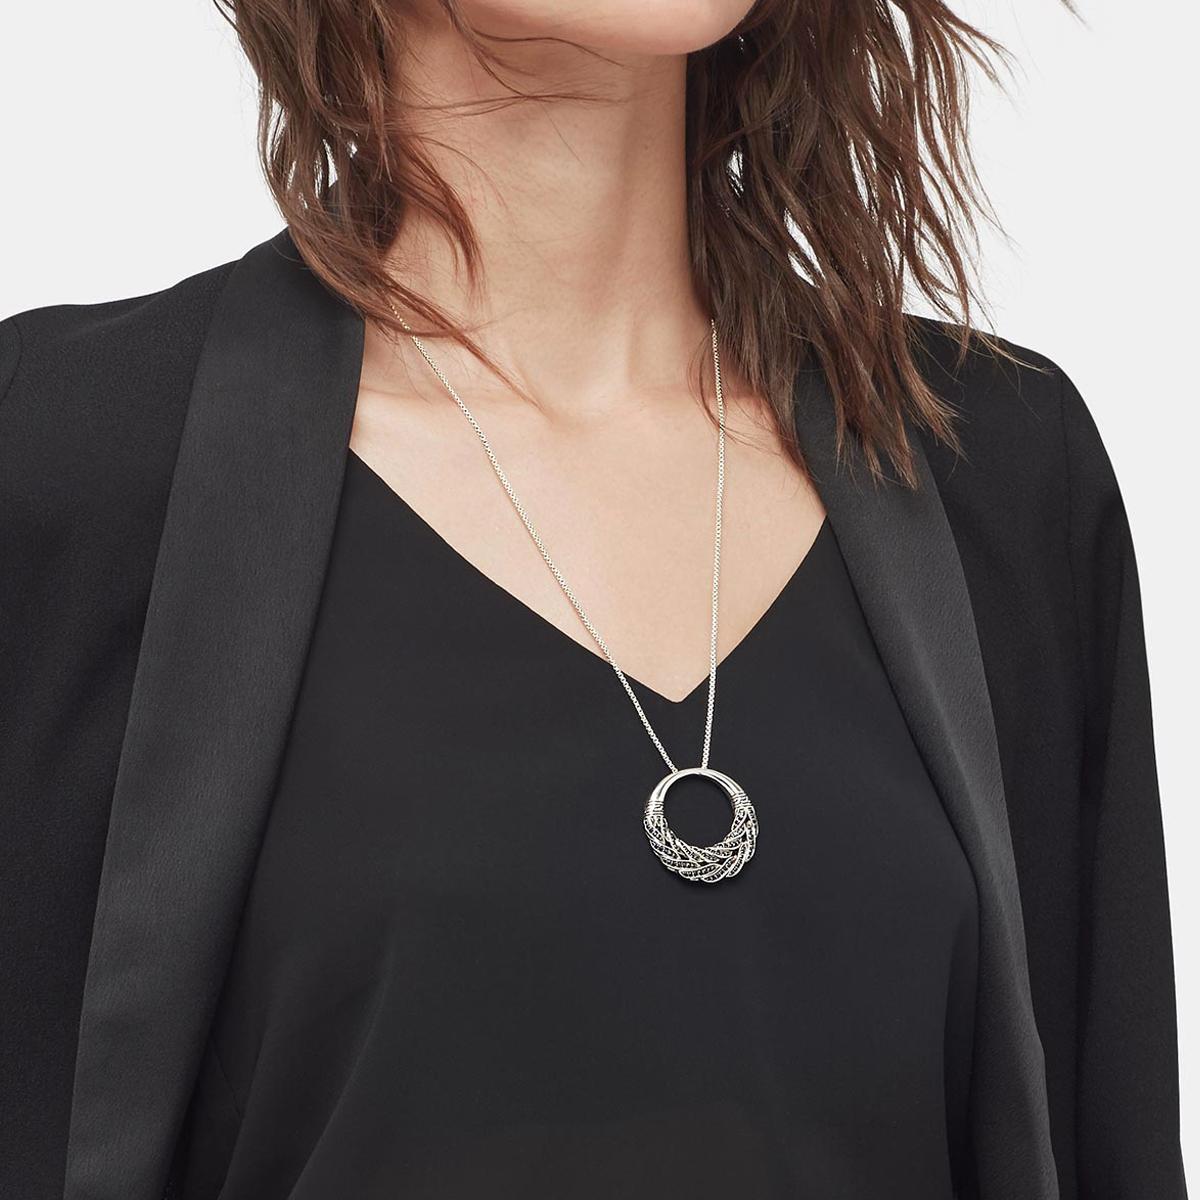 This new John Hardy open circle pendant necklace was handcrafted with the classic chain motif in sleek sterling silver. It features pave set black sapphire and black spinel stones. The pendant is on 32